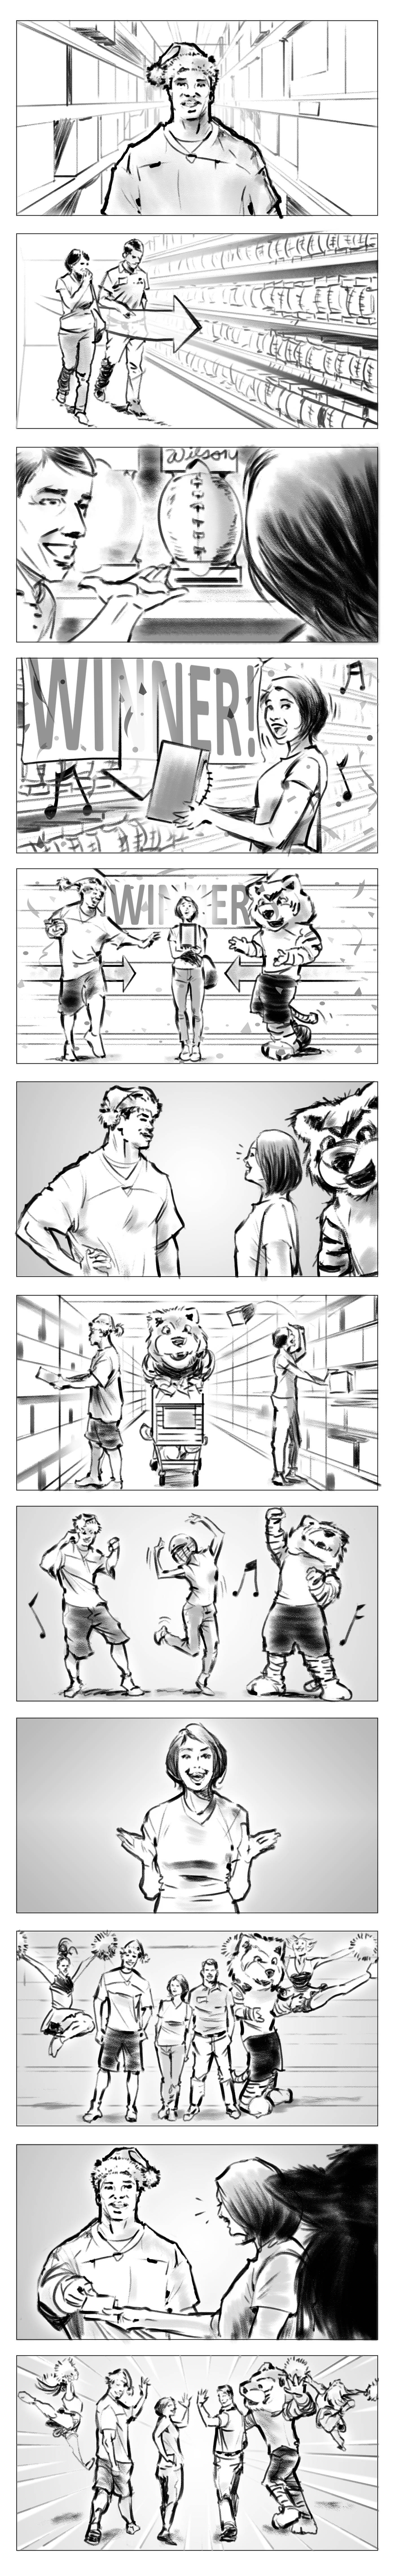 Academy Sports + Outdoors commercial storyboards